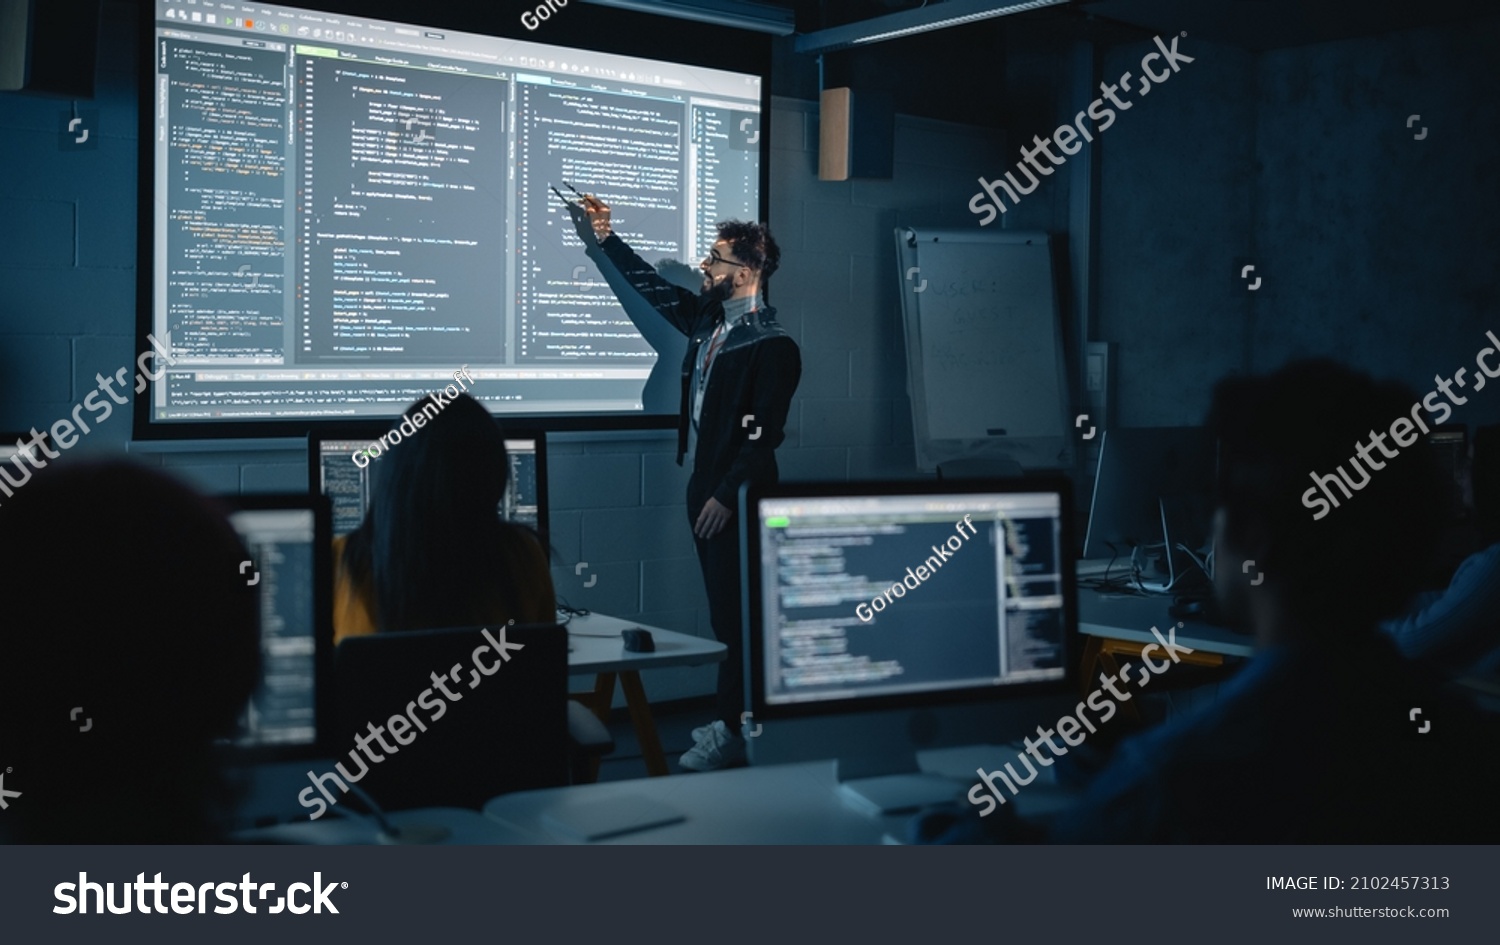 Teacher Giving Computer Science Lecture to Diverse Multiethnic Group of Female and Male Students in Dark College Room. Projecting Slideshow with Programming Code. Explaining Information Technology. #2102457313